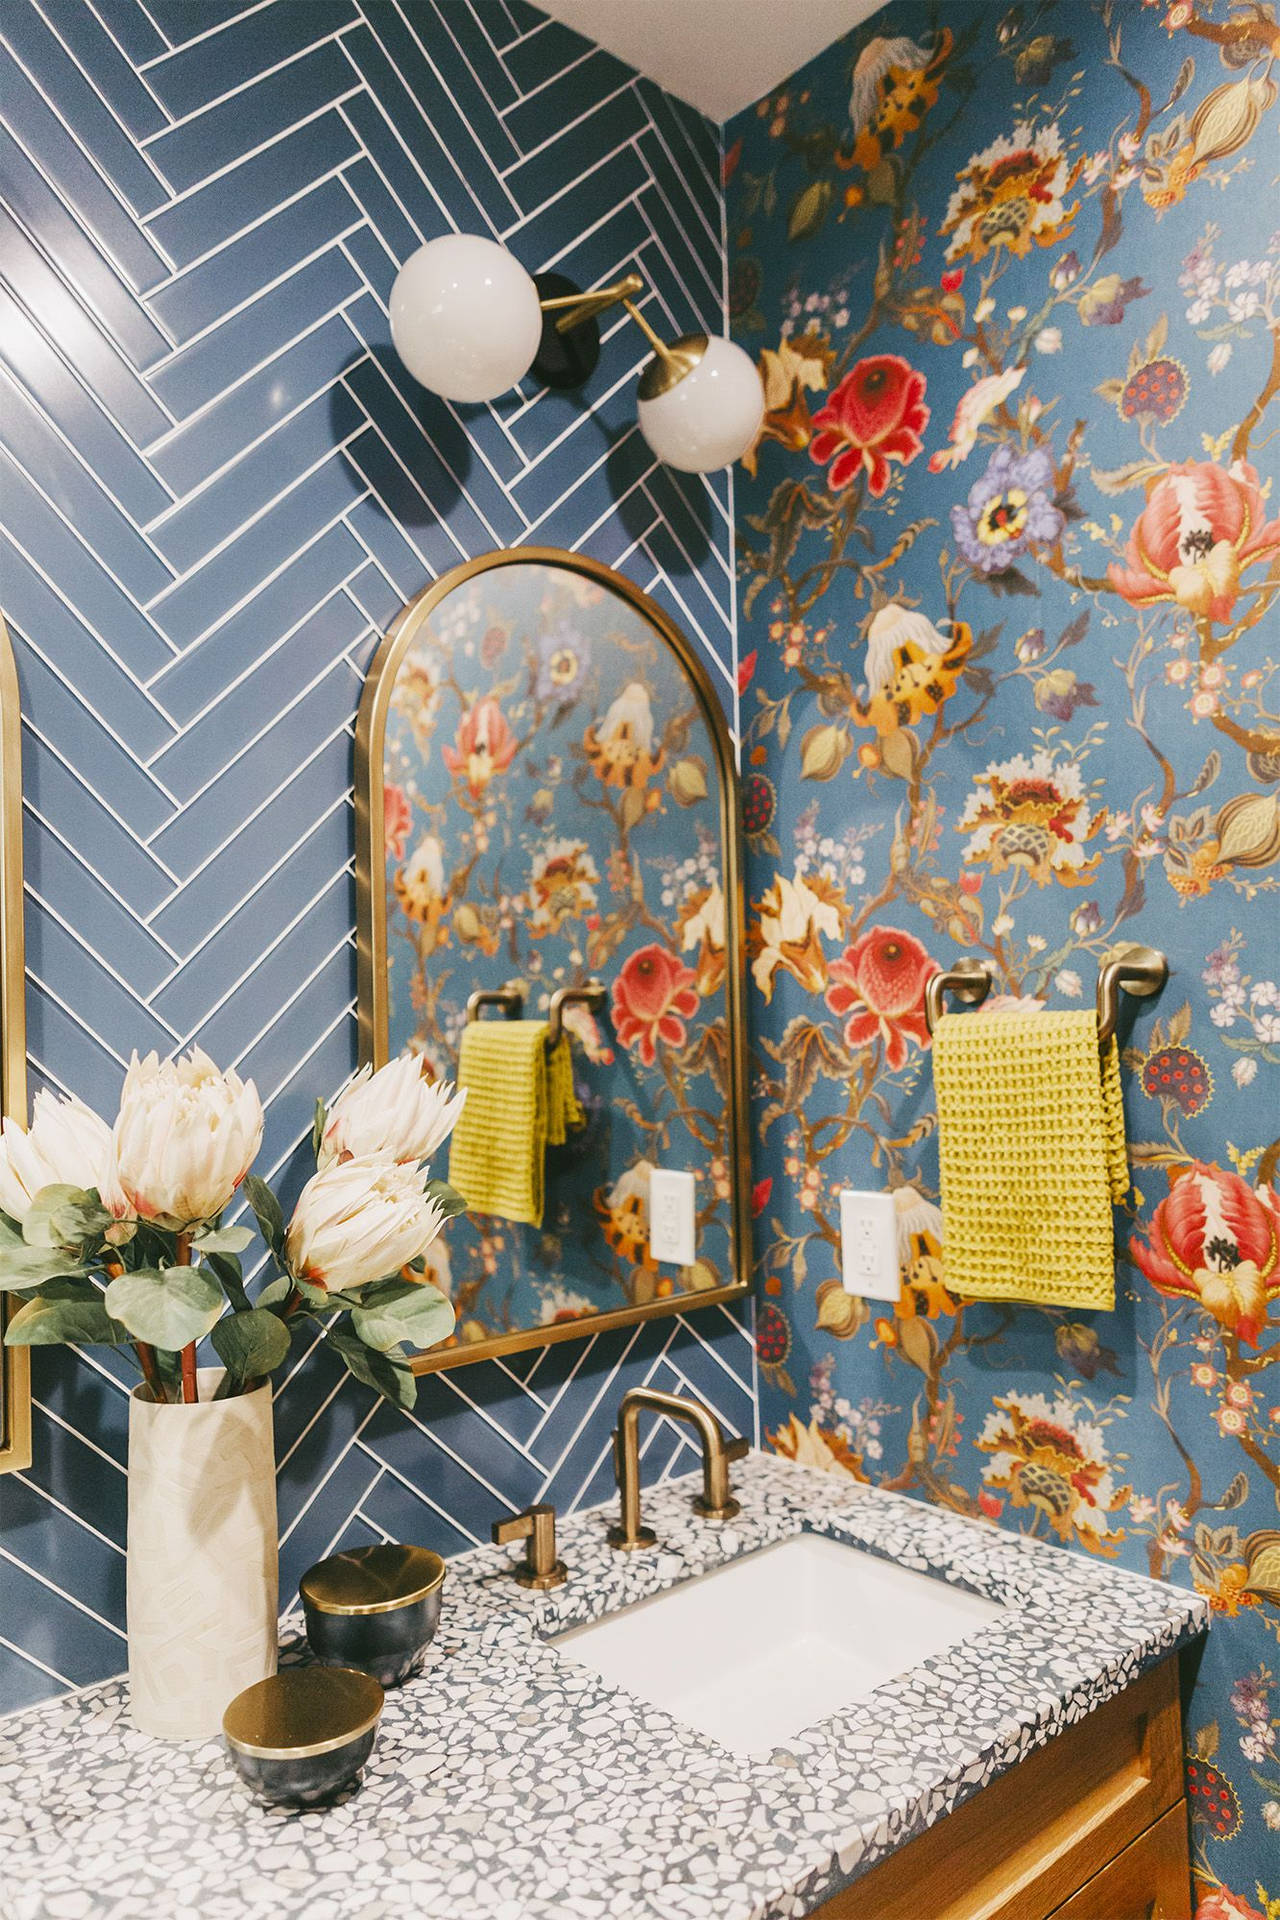 30+ decorating ideas for powder rooms to make them stylish and functional